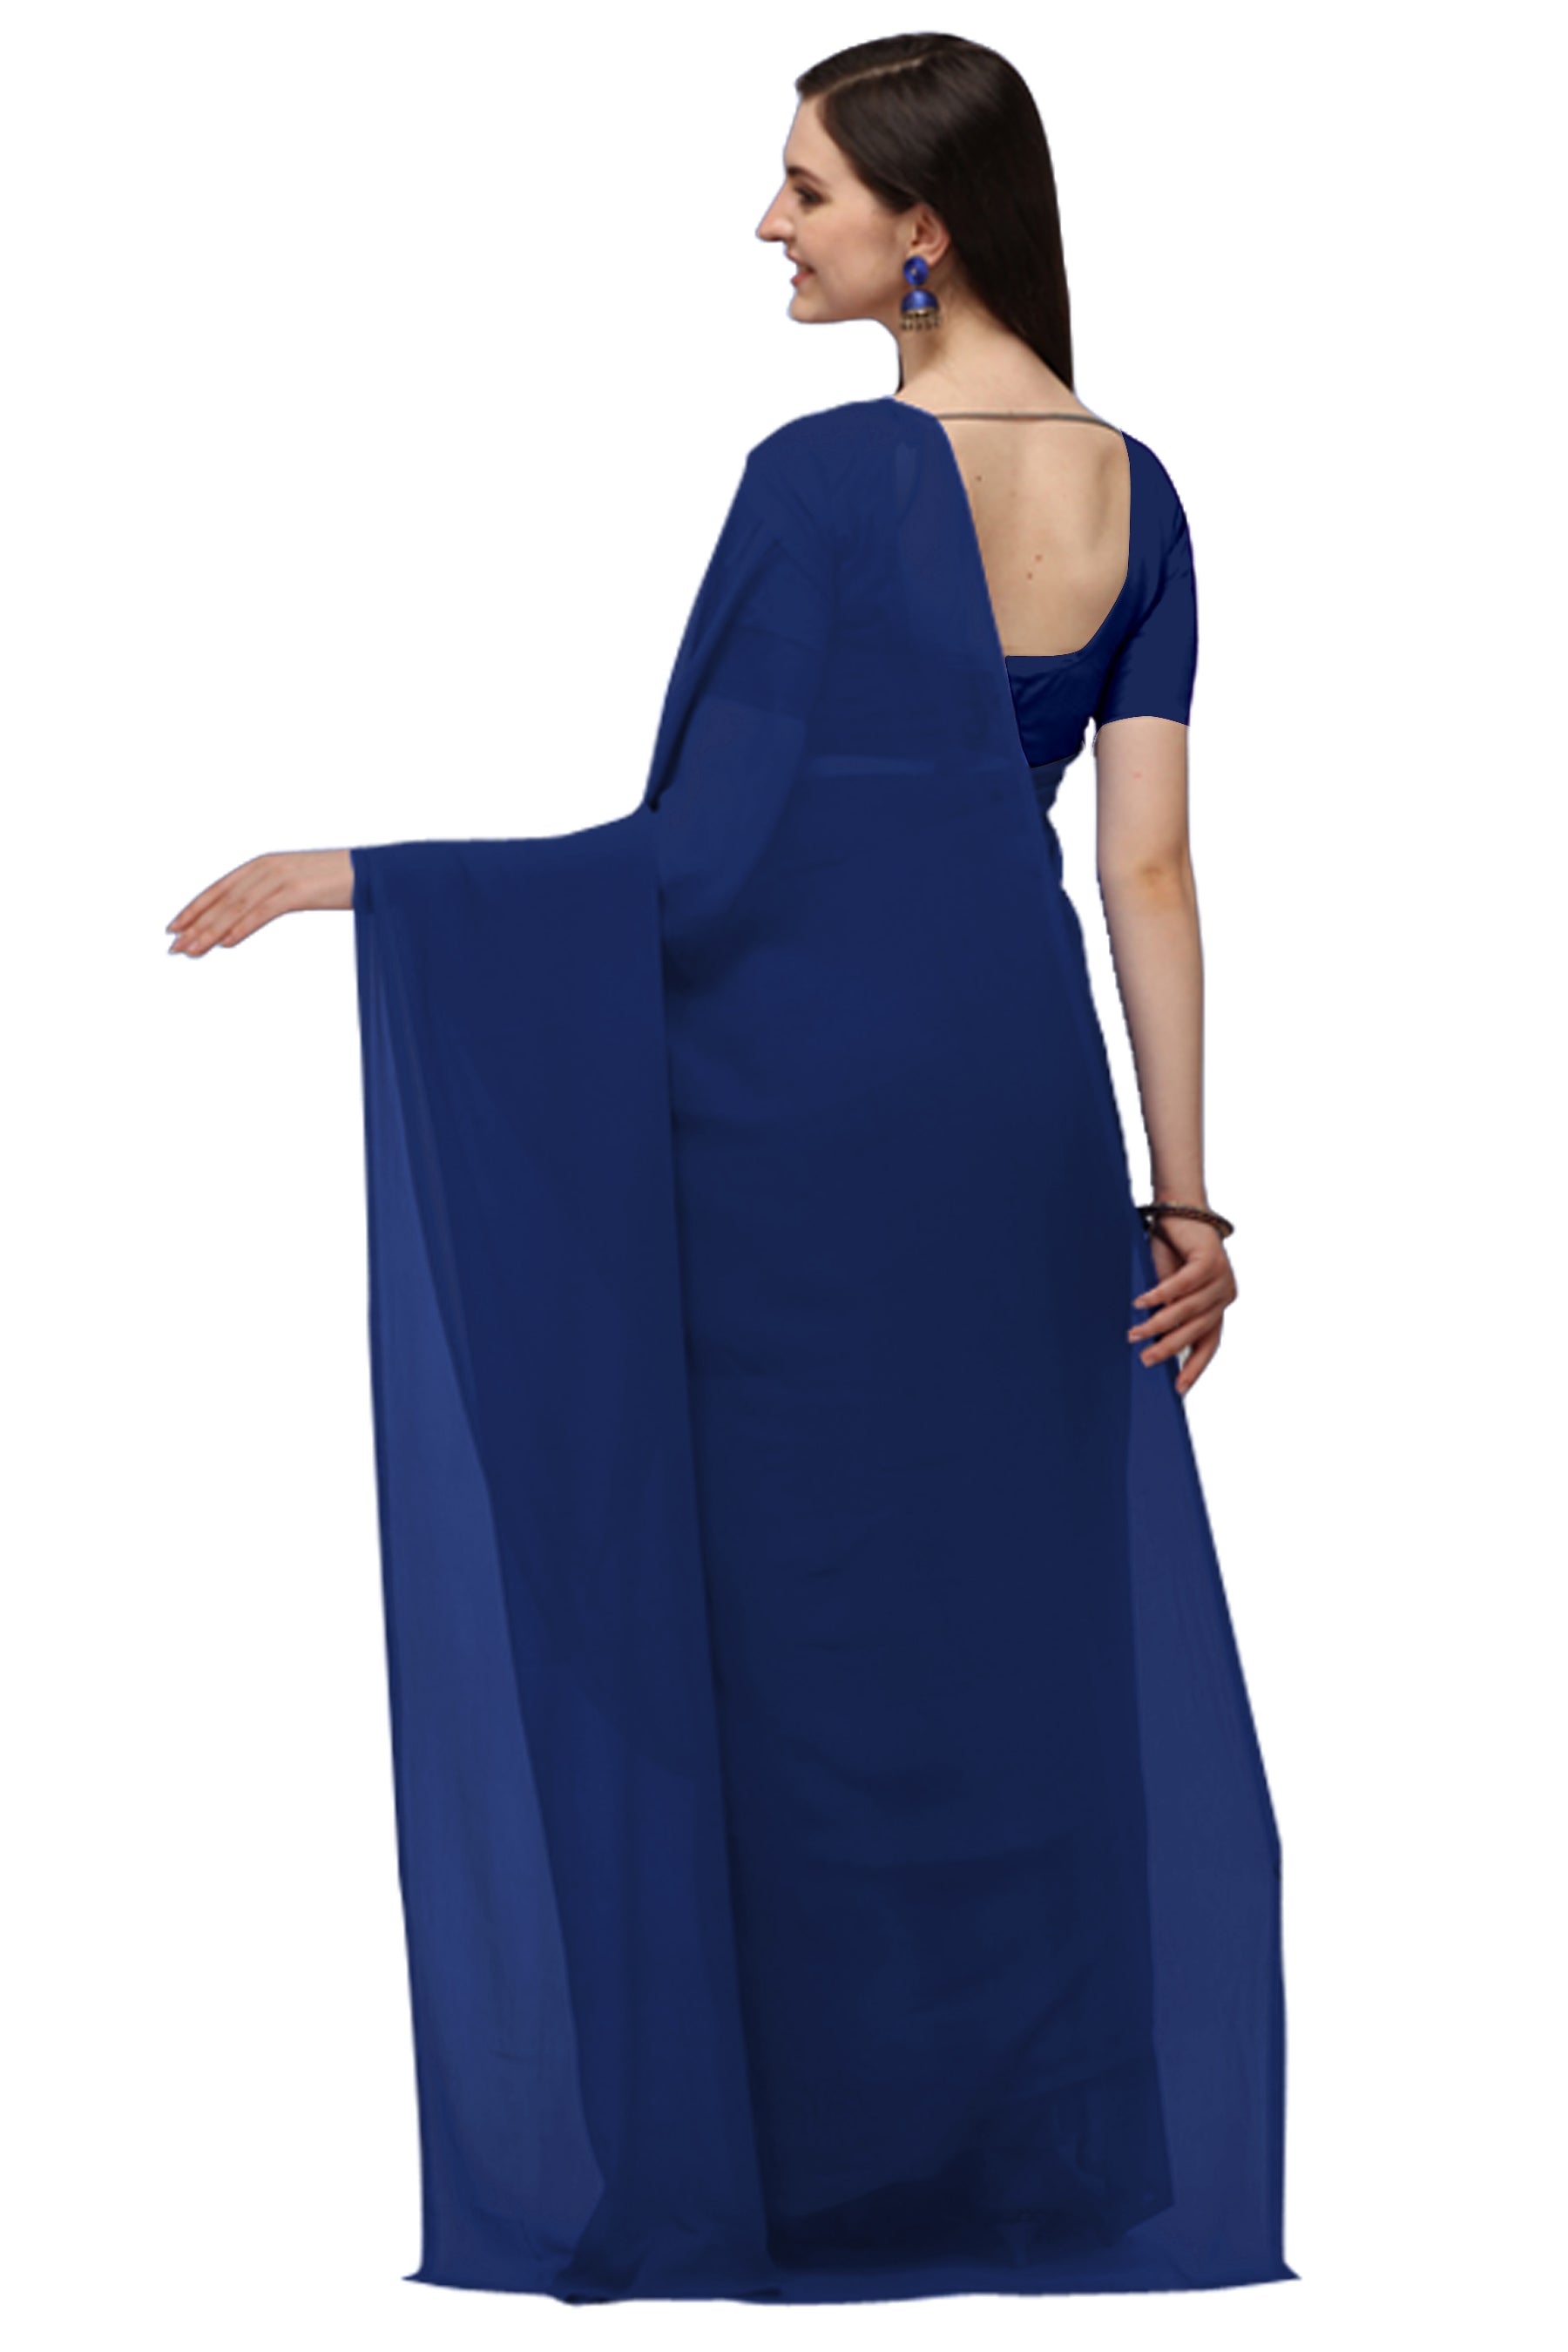 Women's Plain Woven Daily Wear  Formal Georgette Sari With Blouse Piece (Navy Blue) - NIMIDHYA